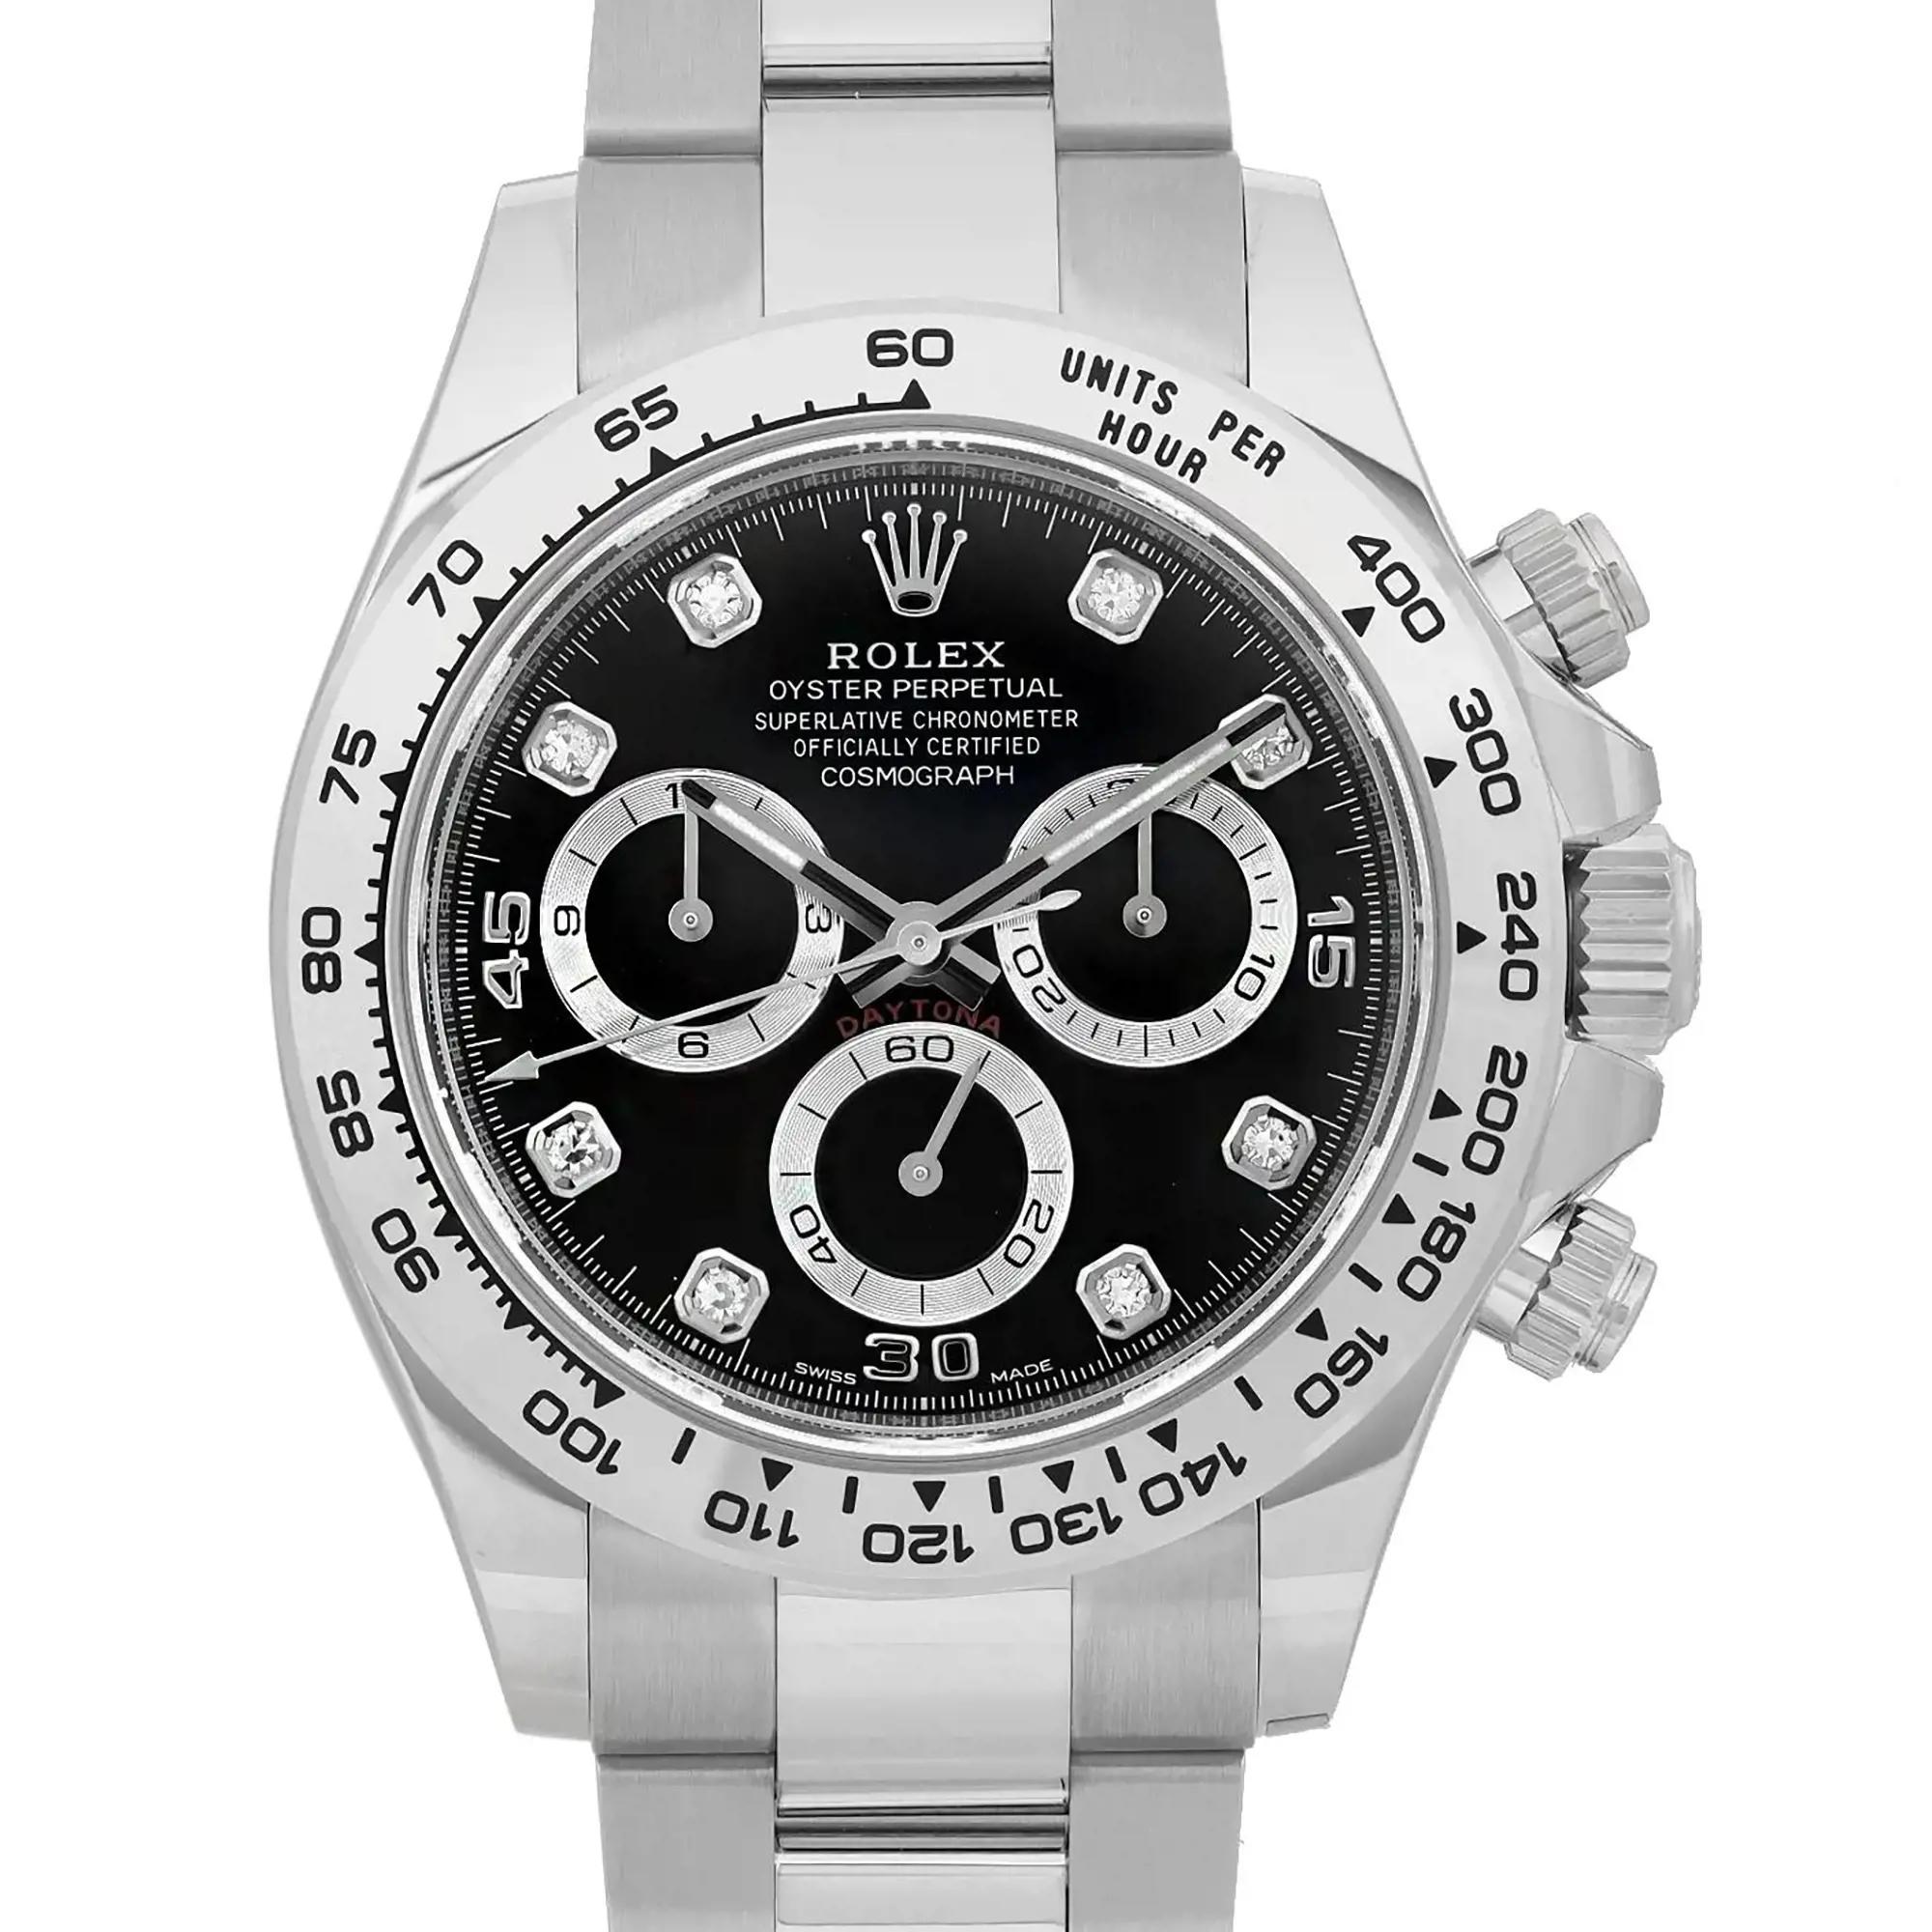 Unworn. 2022 card. Original box and papers. 

Brand: Rolex  Type: Wristwatch  Department: Men  Model Number: 116509  Country/Region of Manufacture: Switzerland  Style: Luxury  Model: Rolex Daytona 116509  Vintage: No  Escapement Type: Anchor 